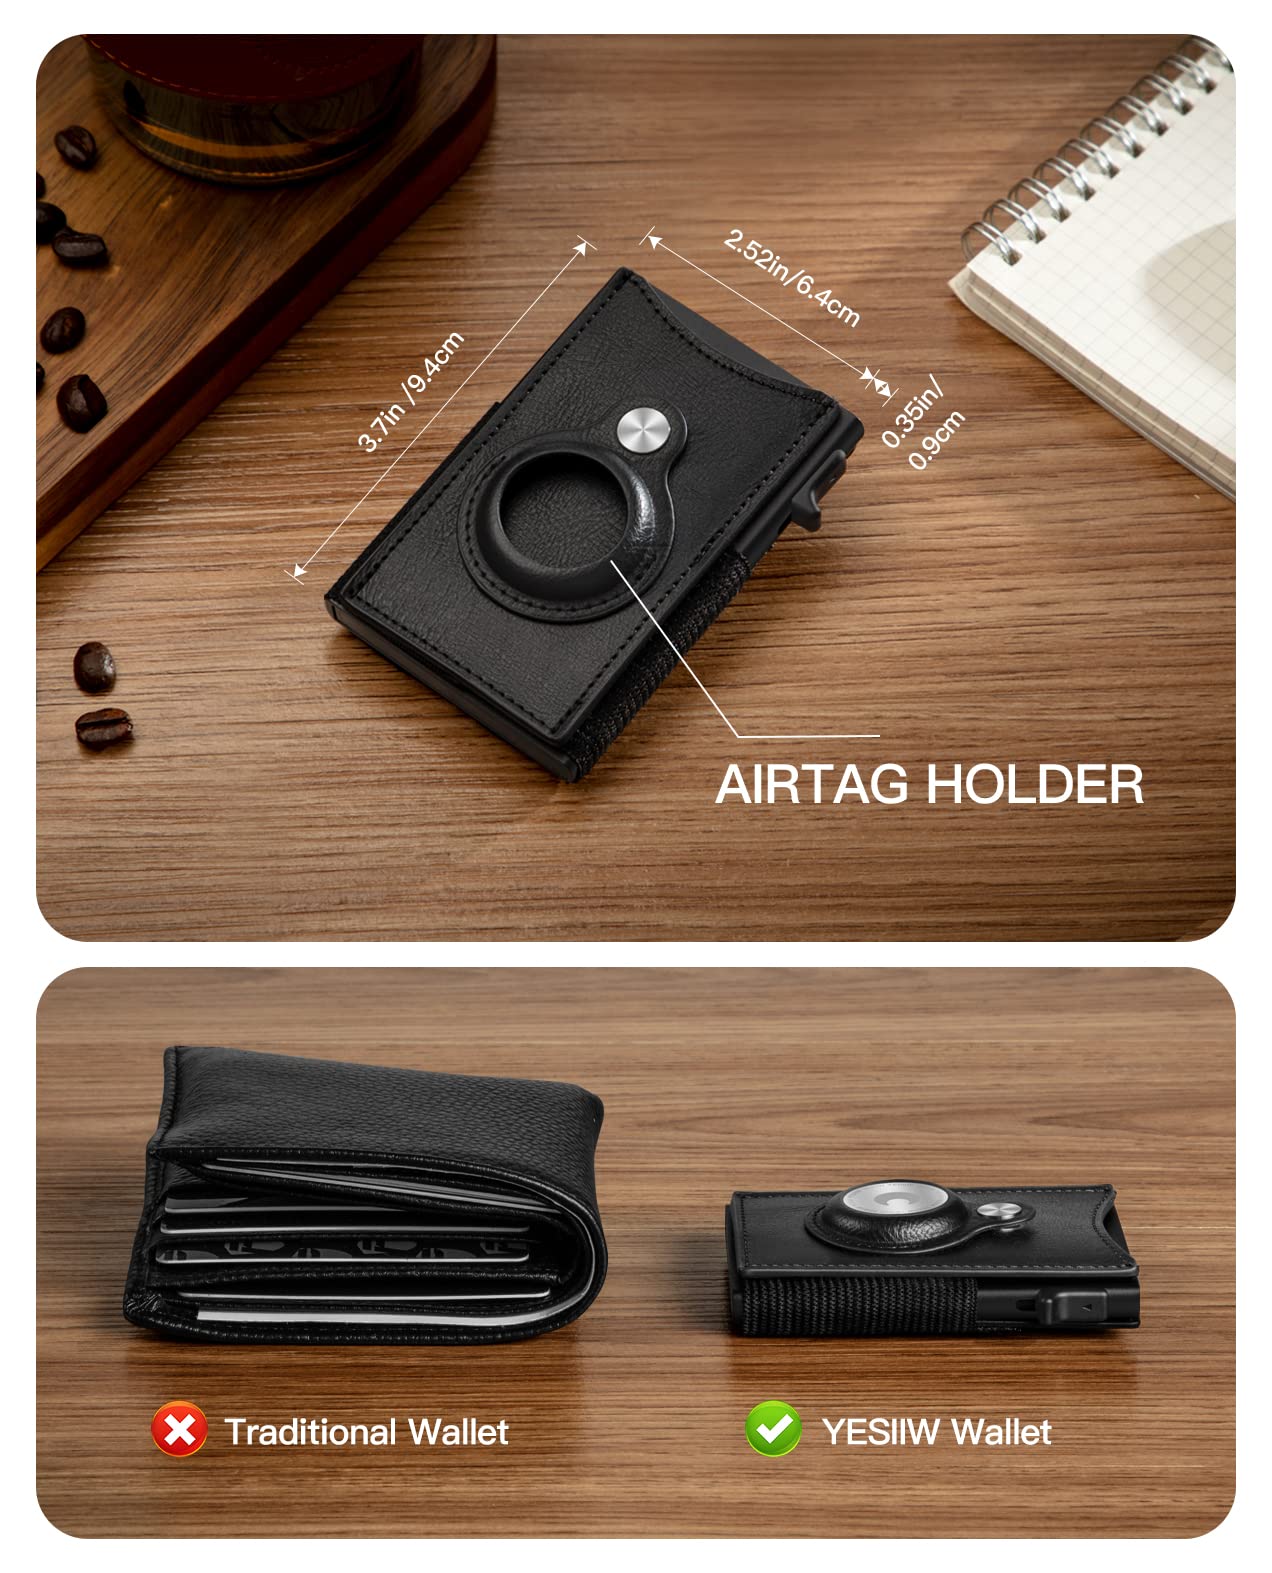 YESIIW AirTag Wallet for Men with Apple Airtag Holder RFID Blocking | Slim Pop up Air Tag Credit Card Holder with Elasitc Pocket | Smart Leather Wallet with Multi Purpose Survival Tool Black